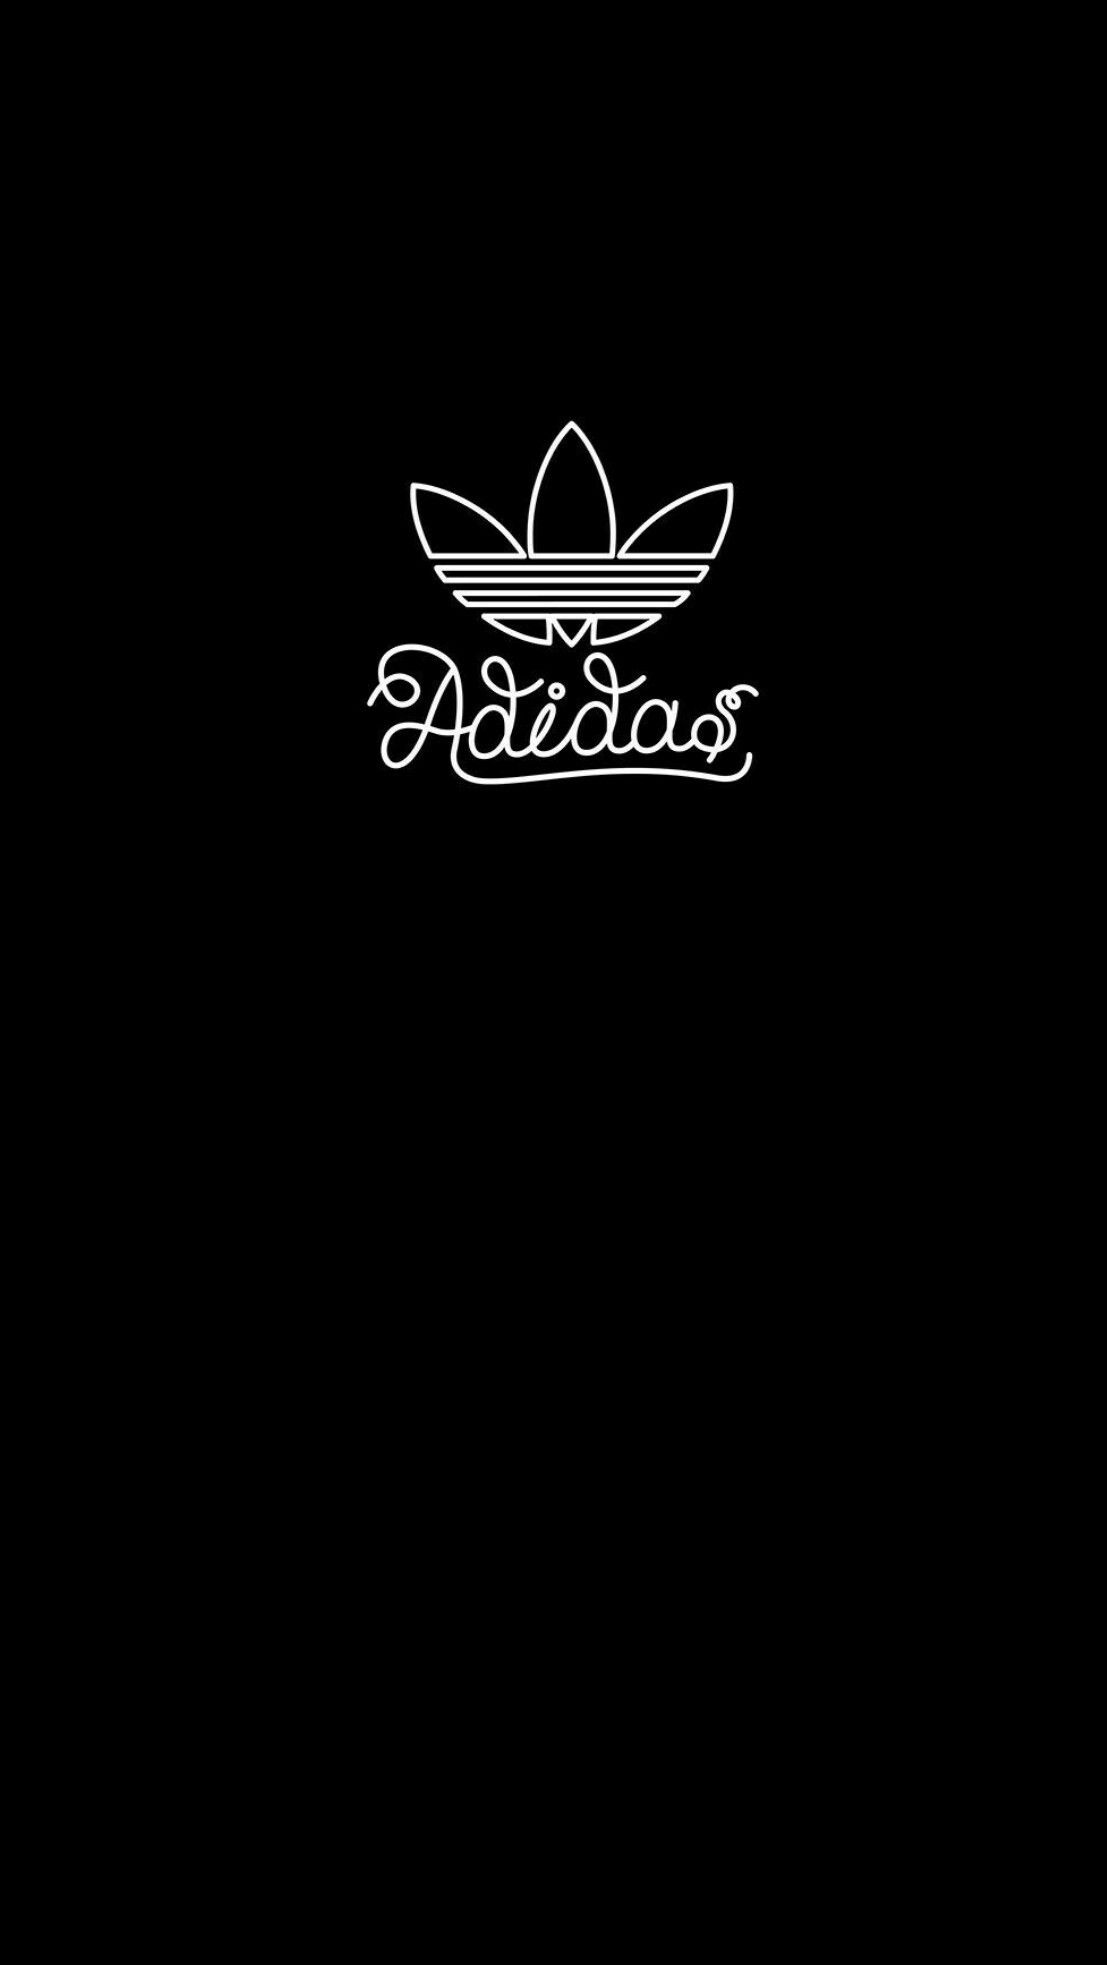 Free download 20 Adidas ideas adidas wallpaper iphone adidas message  wallpaper 1206x2605 for your Desktop Mobile  Tablet  Explore 38 Adidas  Phone Wallpapers  Adidas 2015 Wallpaper Adidas Wallpapers Adidas  Wallpaper